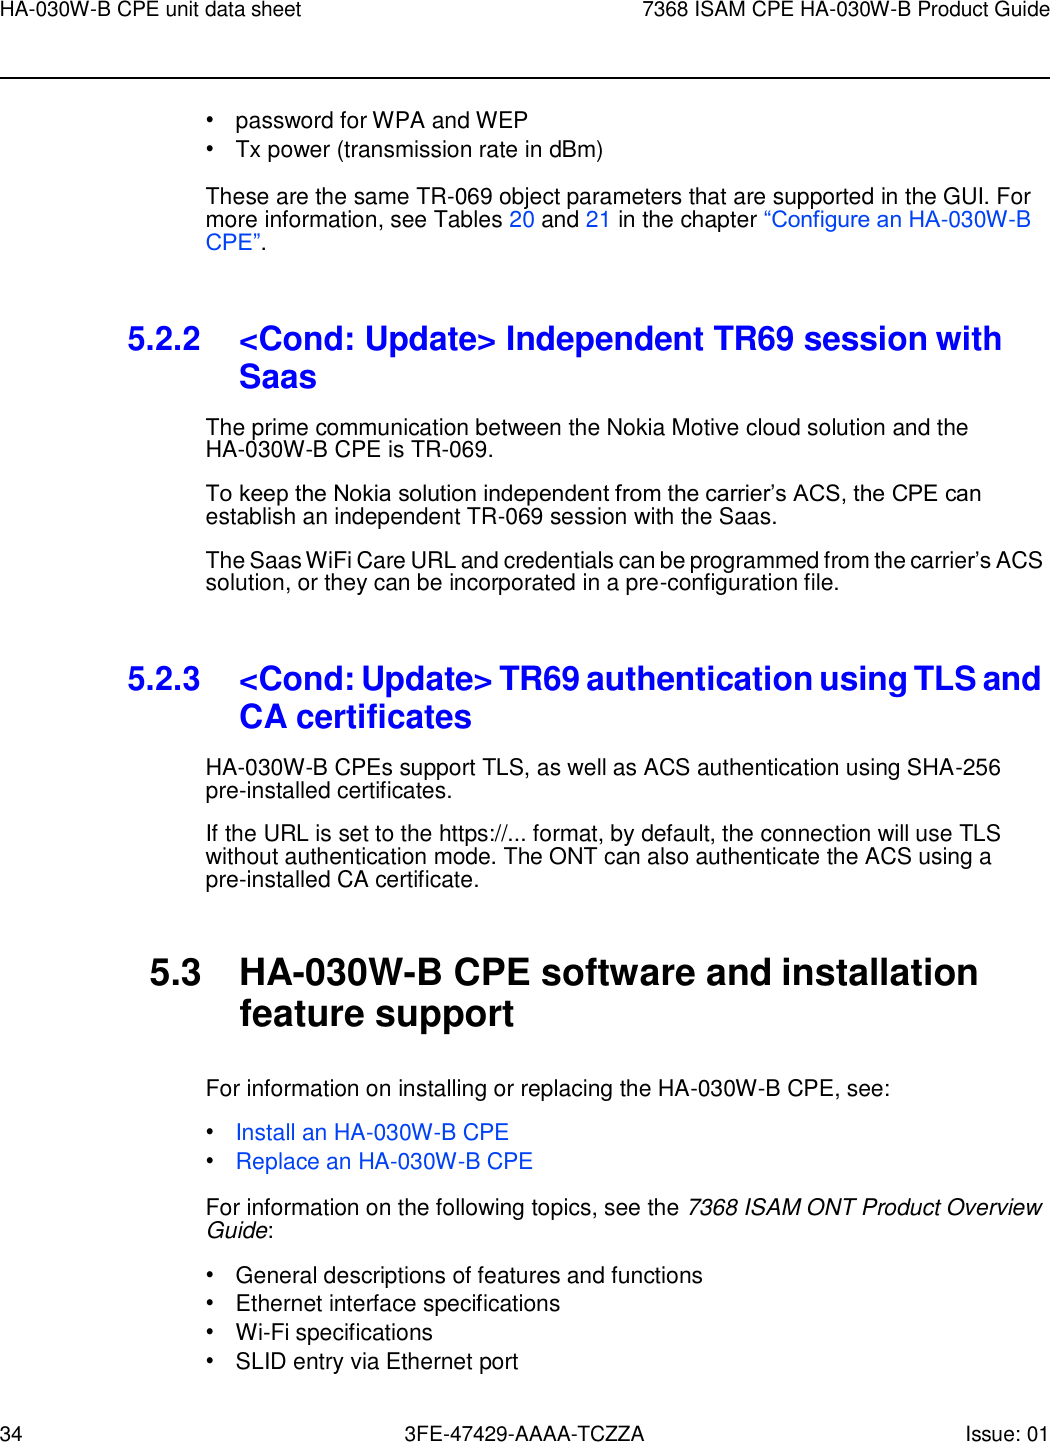 Page 34 of Nokia Bell HA030WB 7368 Intelligent Services Access Manager CPE User Manual 7368 ISAM CPE HA 020W A Product Guide